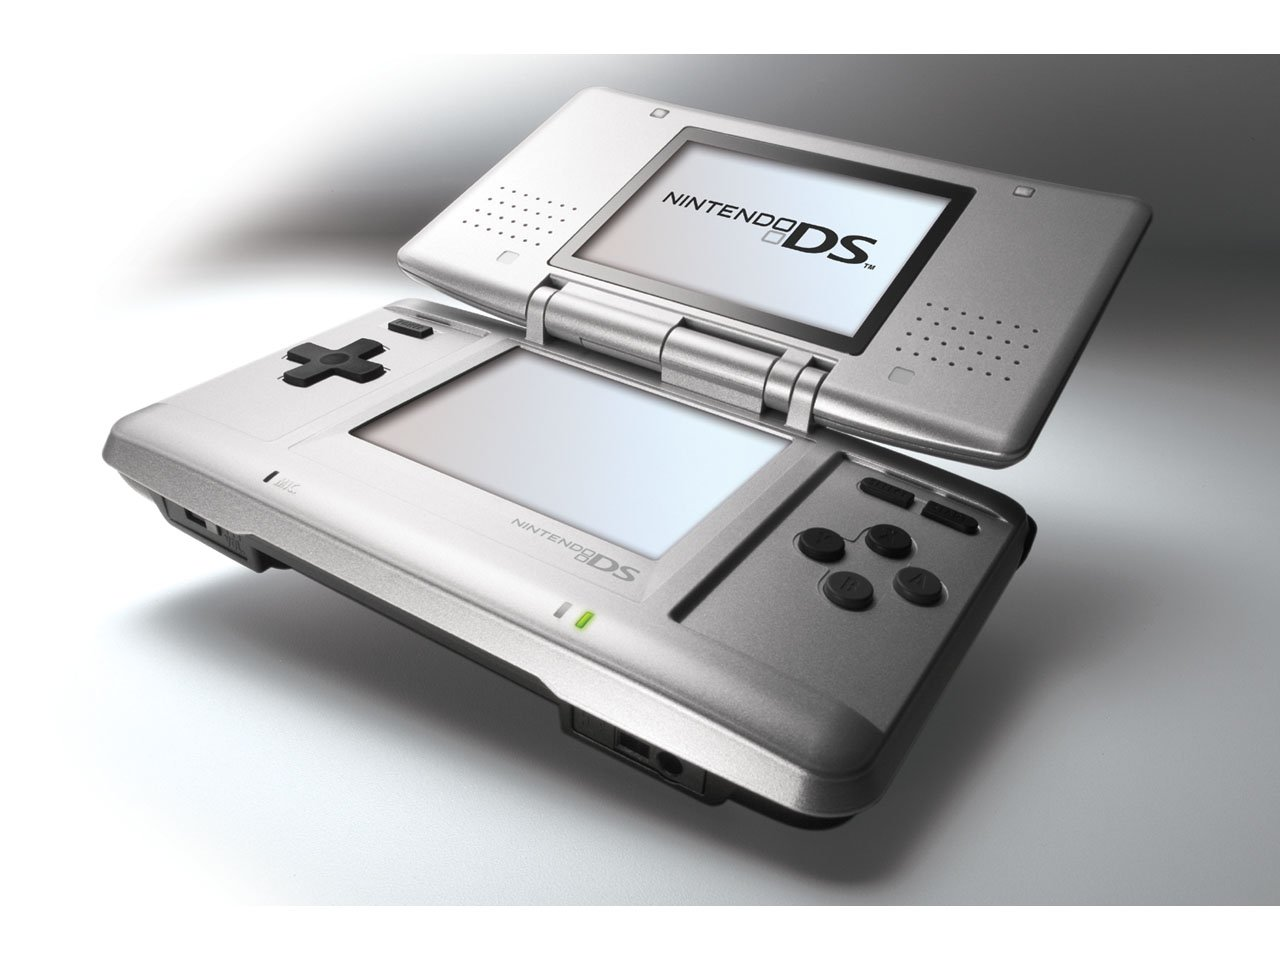 Nintendo DS image Nintendo DS Wallpaper HD wallpaper and background